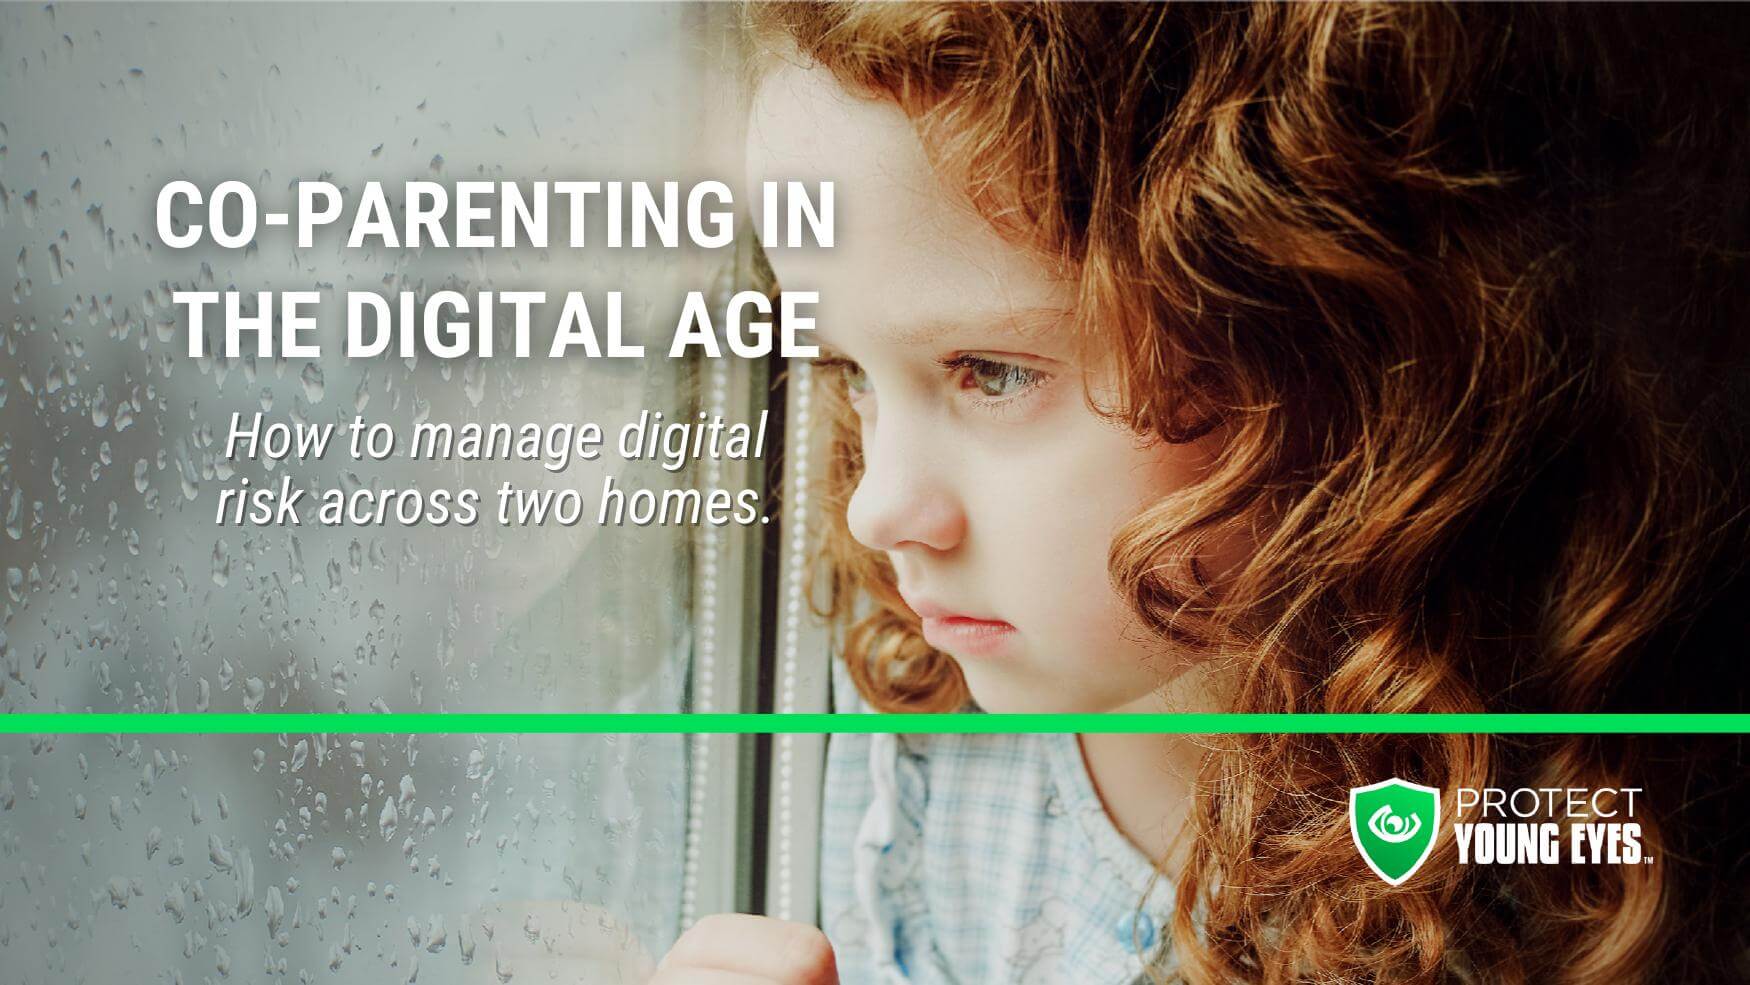 Odia Xxx Girll Video - A Guide to Co-Parenting in the Digital Age - Protect Young Eyes